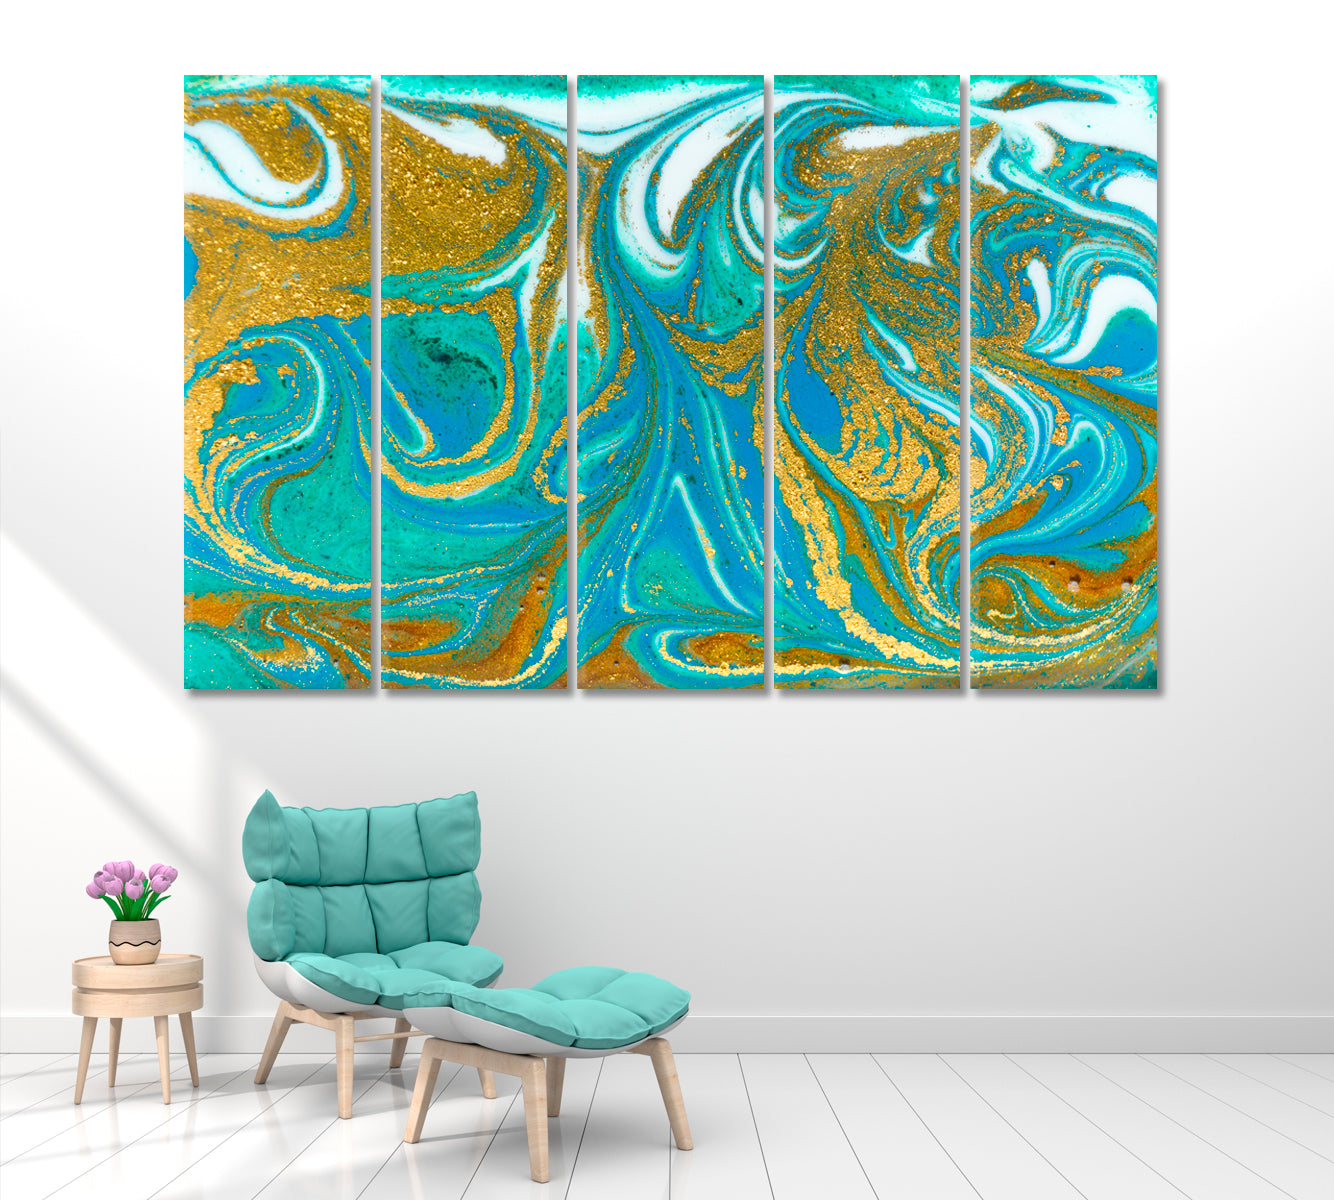 Green and Gold Marble Liquid Pattern Canvas Print ArtLexy 5 Panels 36"x24" inches 